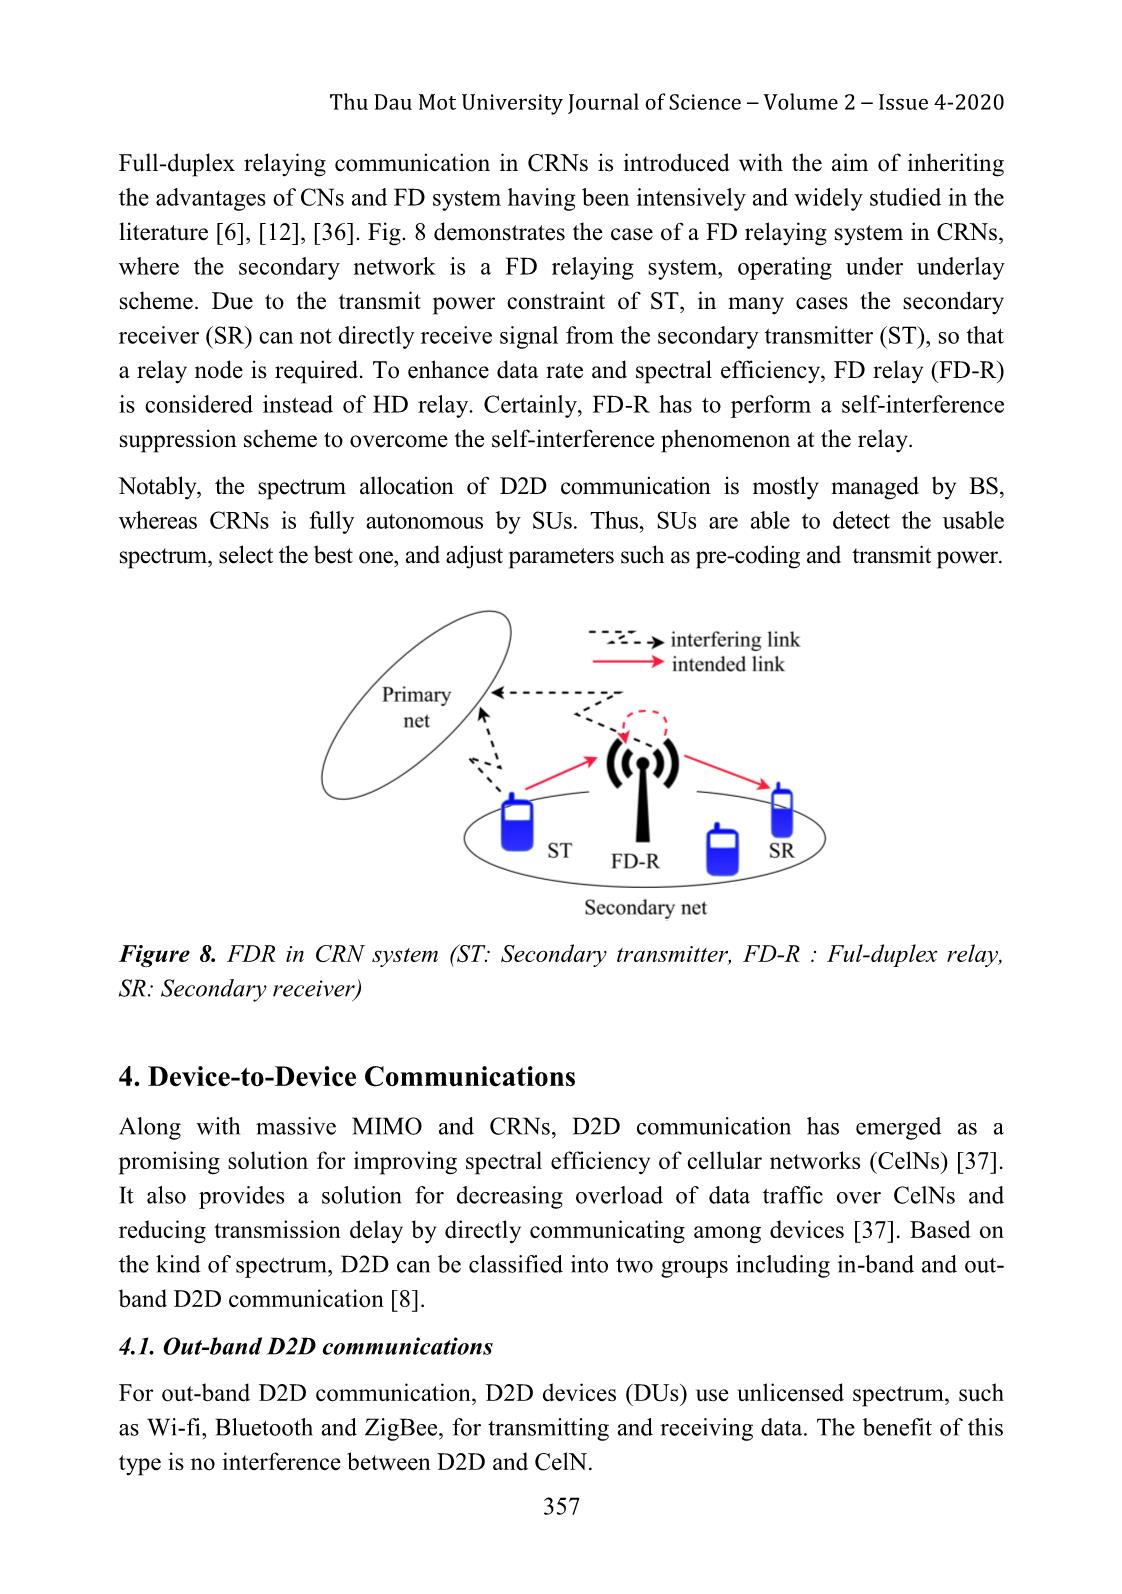 An overview of emerging technologies for 5G: Full-Duplex relaying cognitive radio networks, device-to-device communications and cell-free massive MIMO trang 10